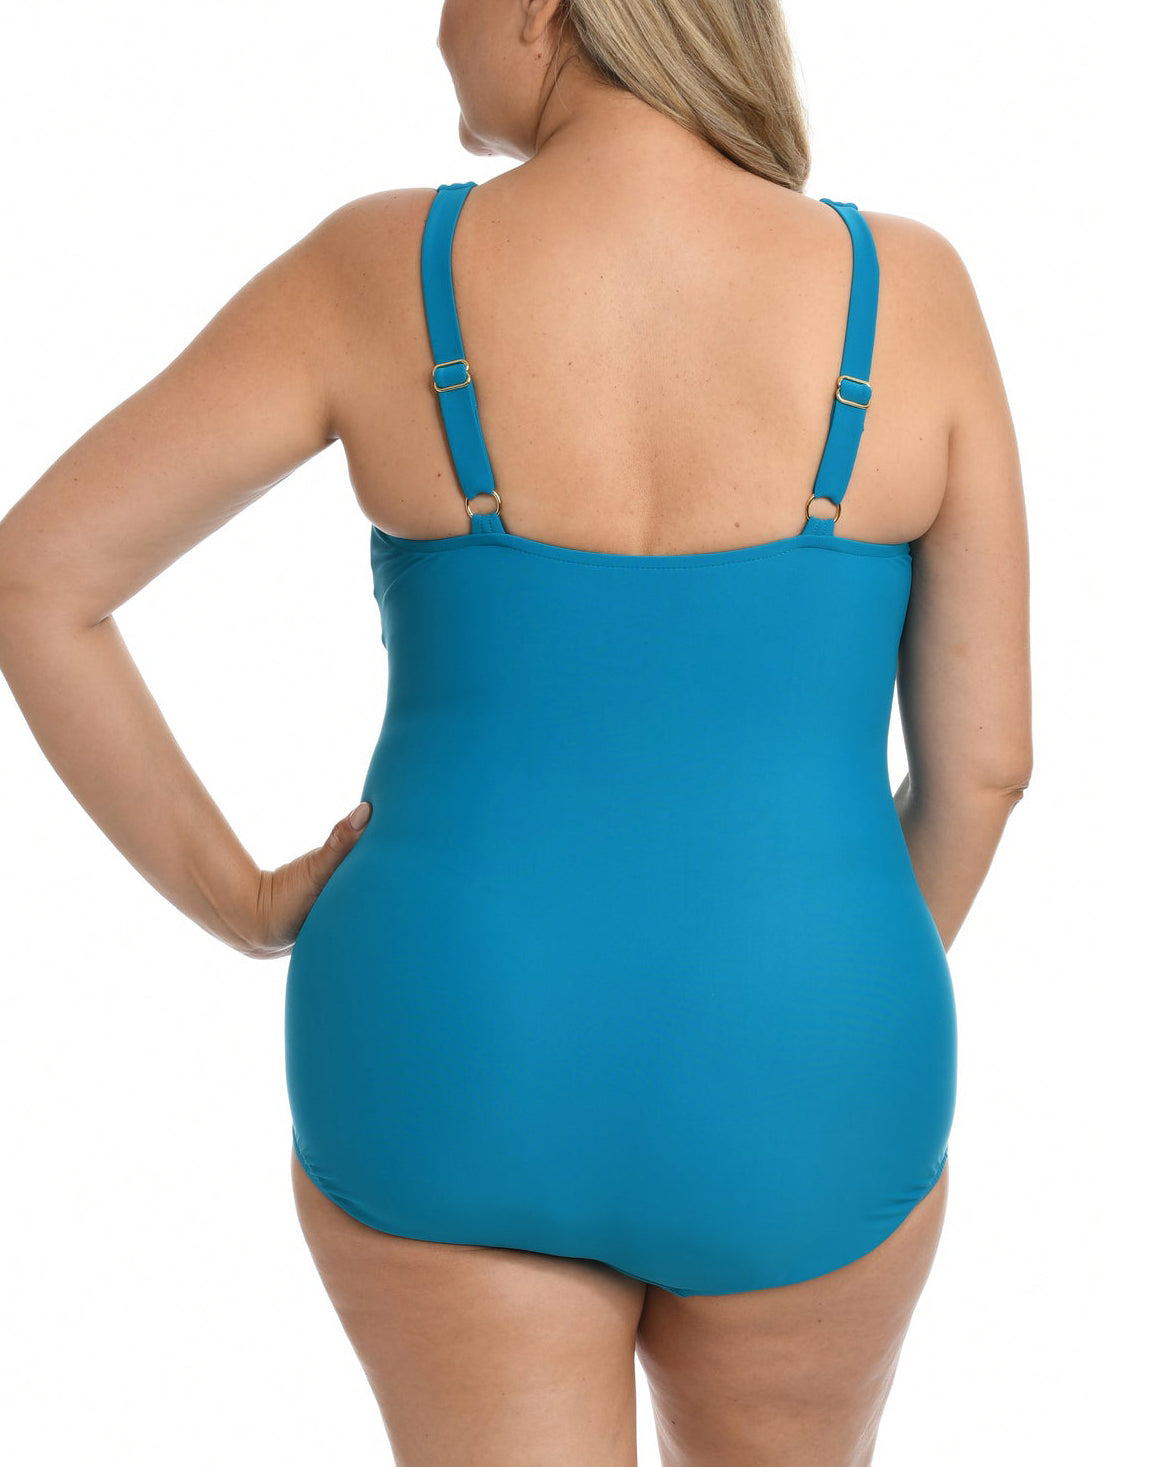 Model wearing a one piece swimsuit with a twist detail in emerald